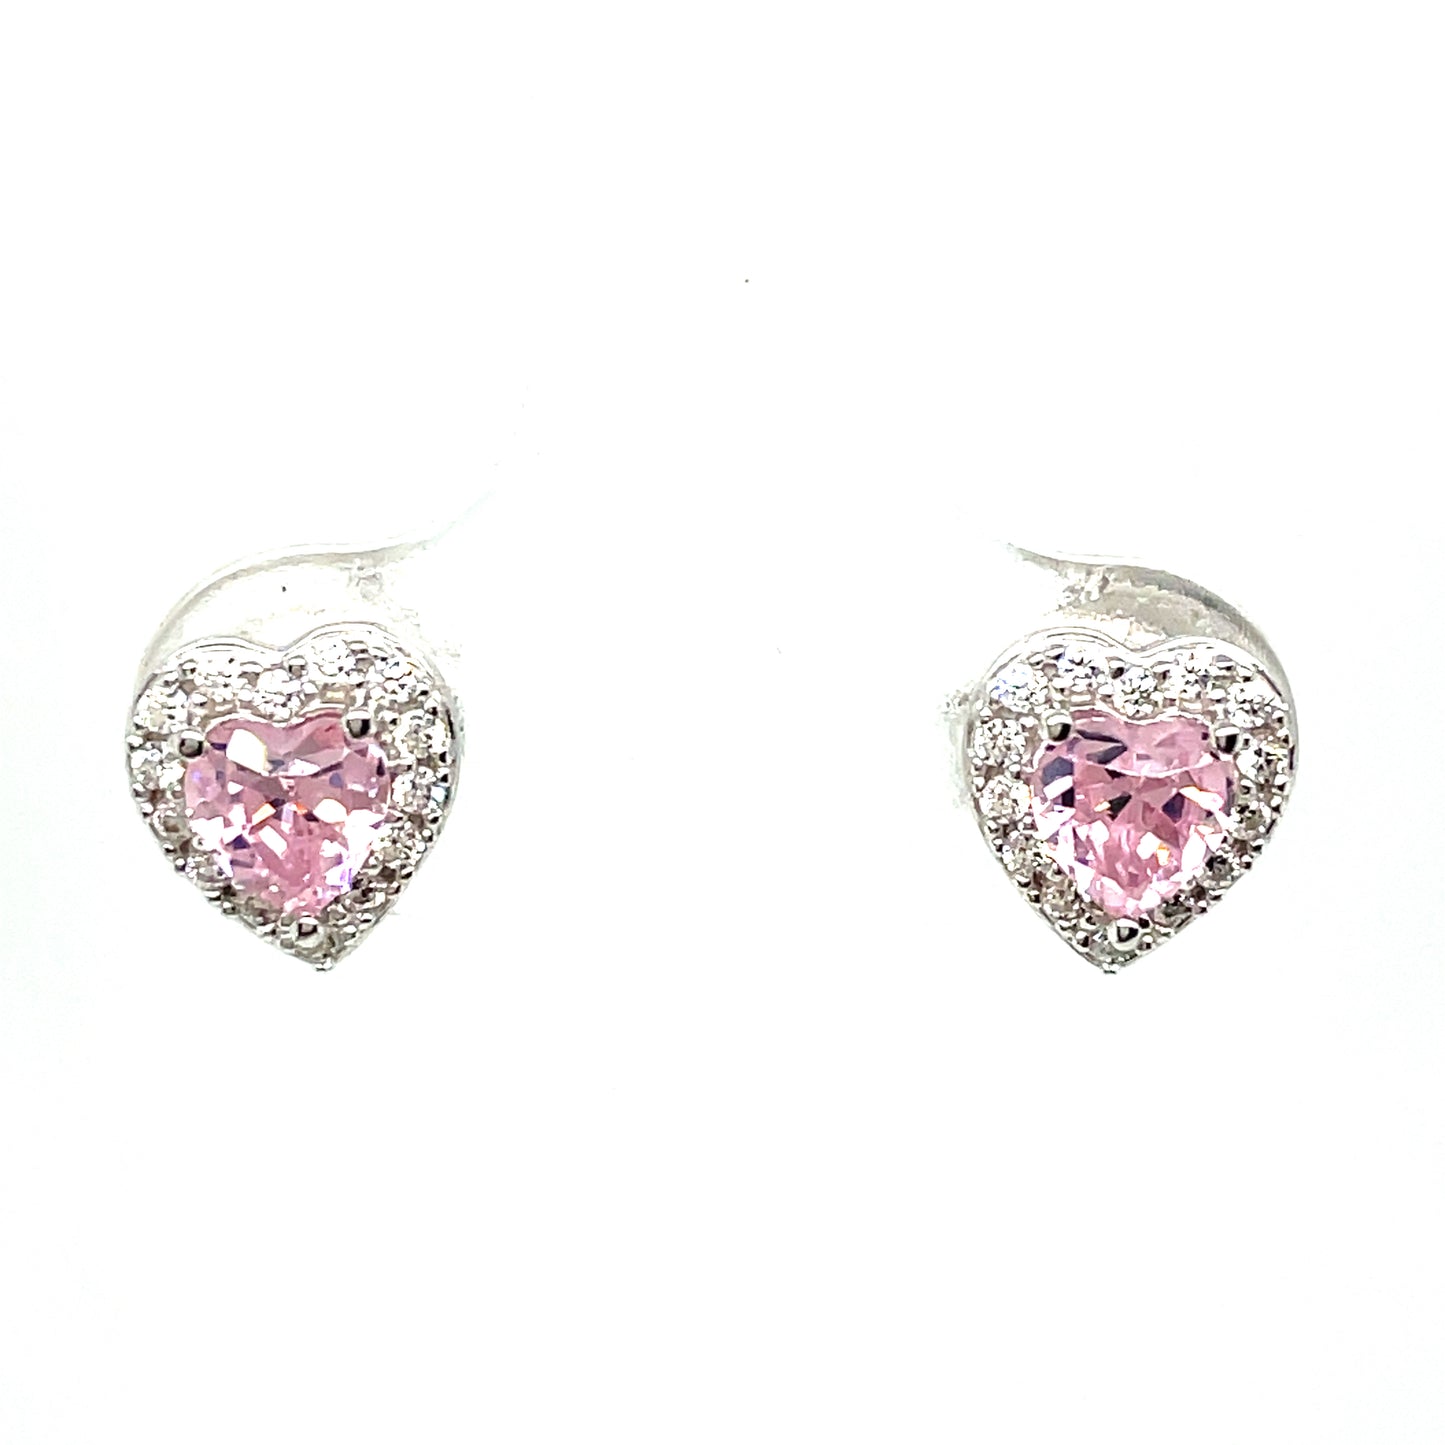 STERLING SILVER CUBIC ZIRCONIA AND PINK STONE HALO HEART STUD EARRING